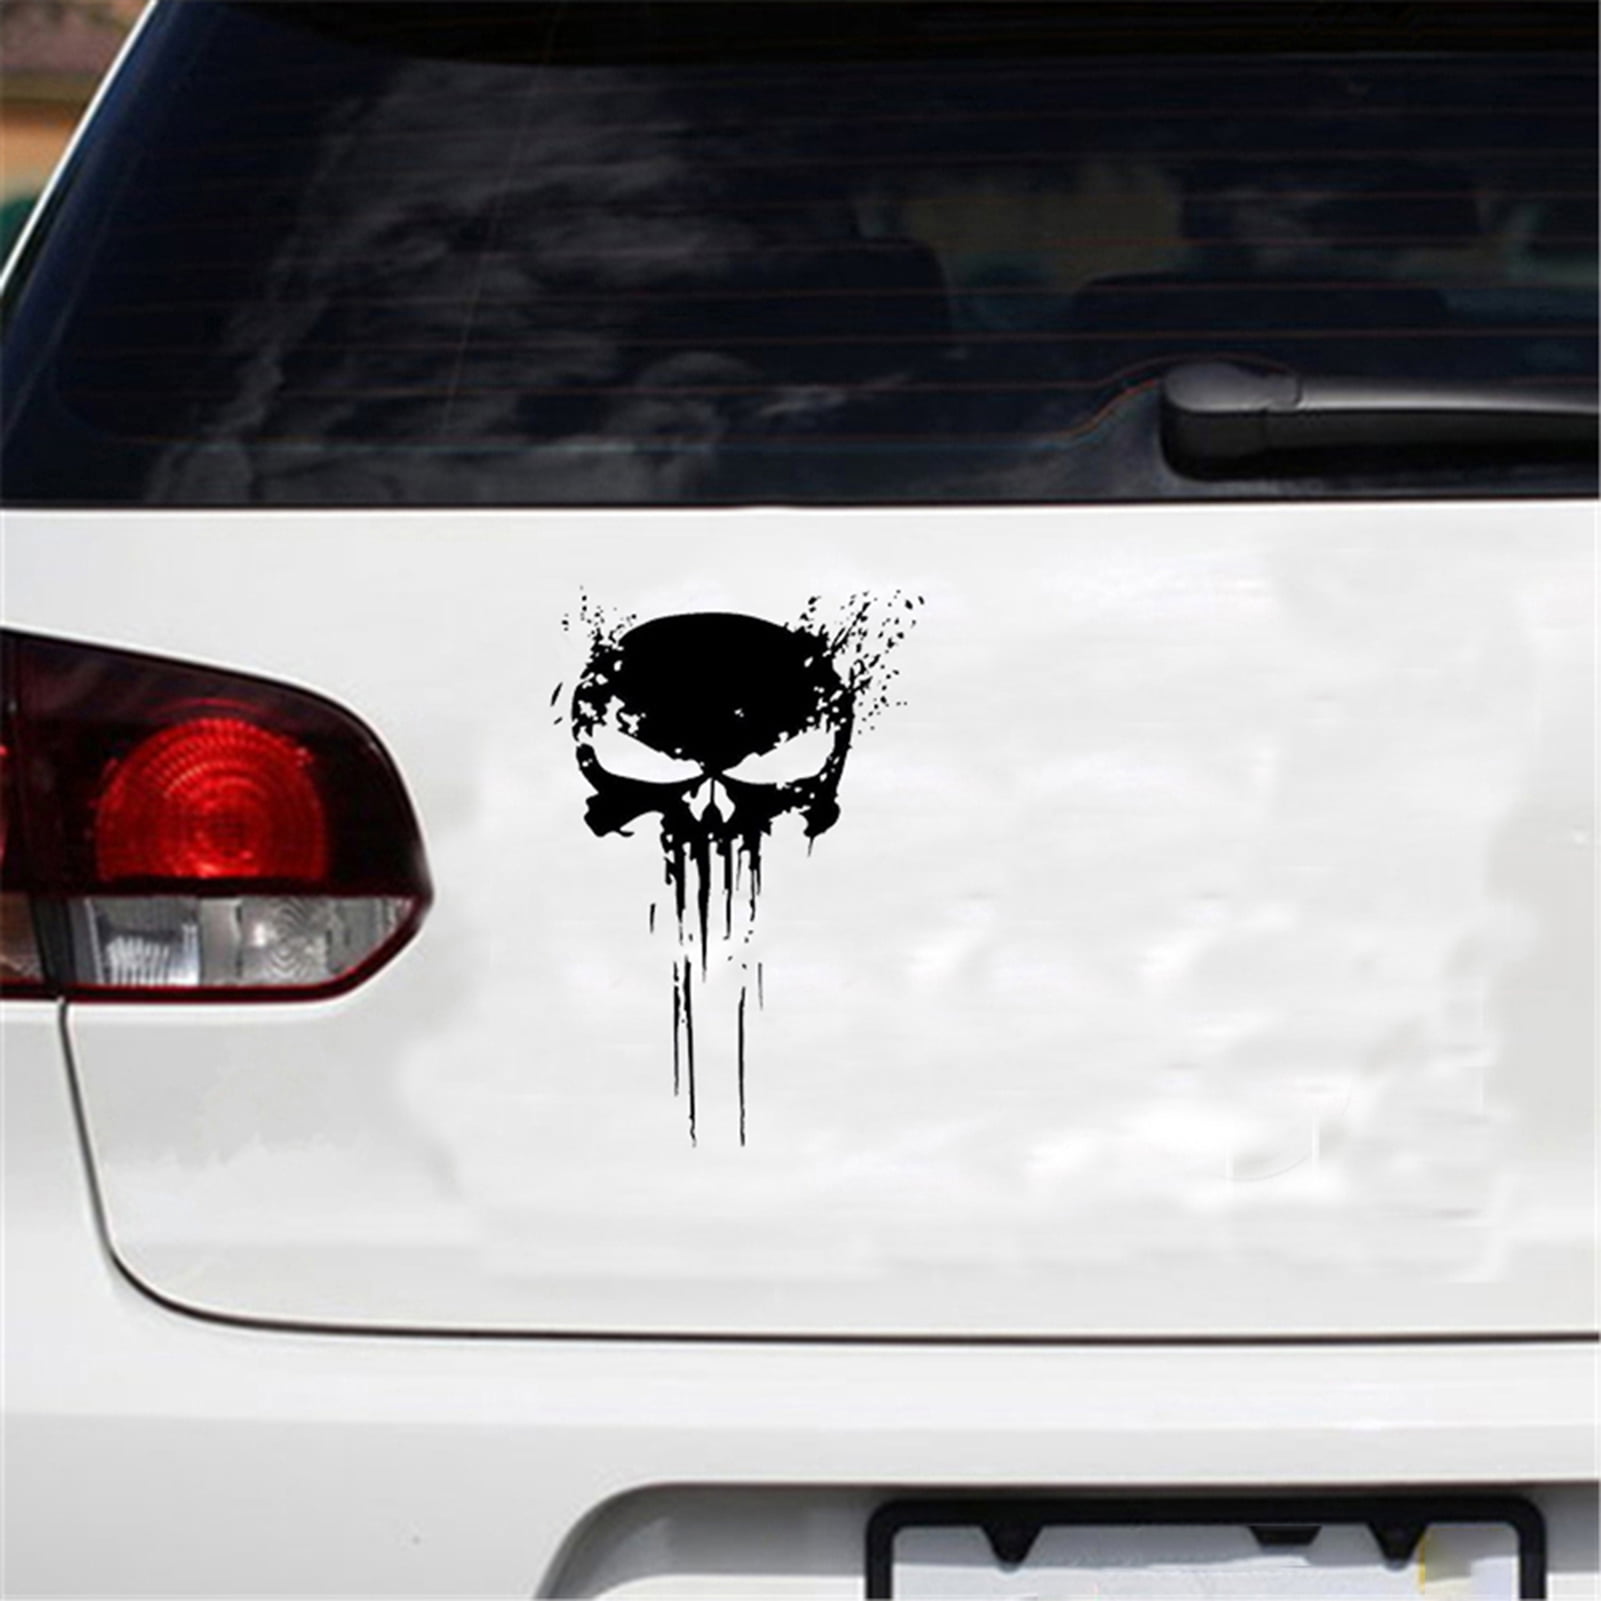 Sticker PUNISHER AMERICA Adhesive Decal Vynil Scooter  Auto Motor Car Bike 